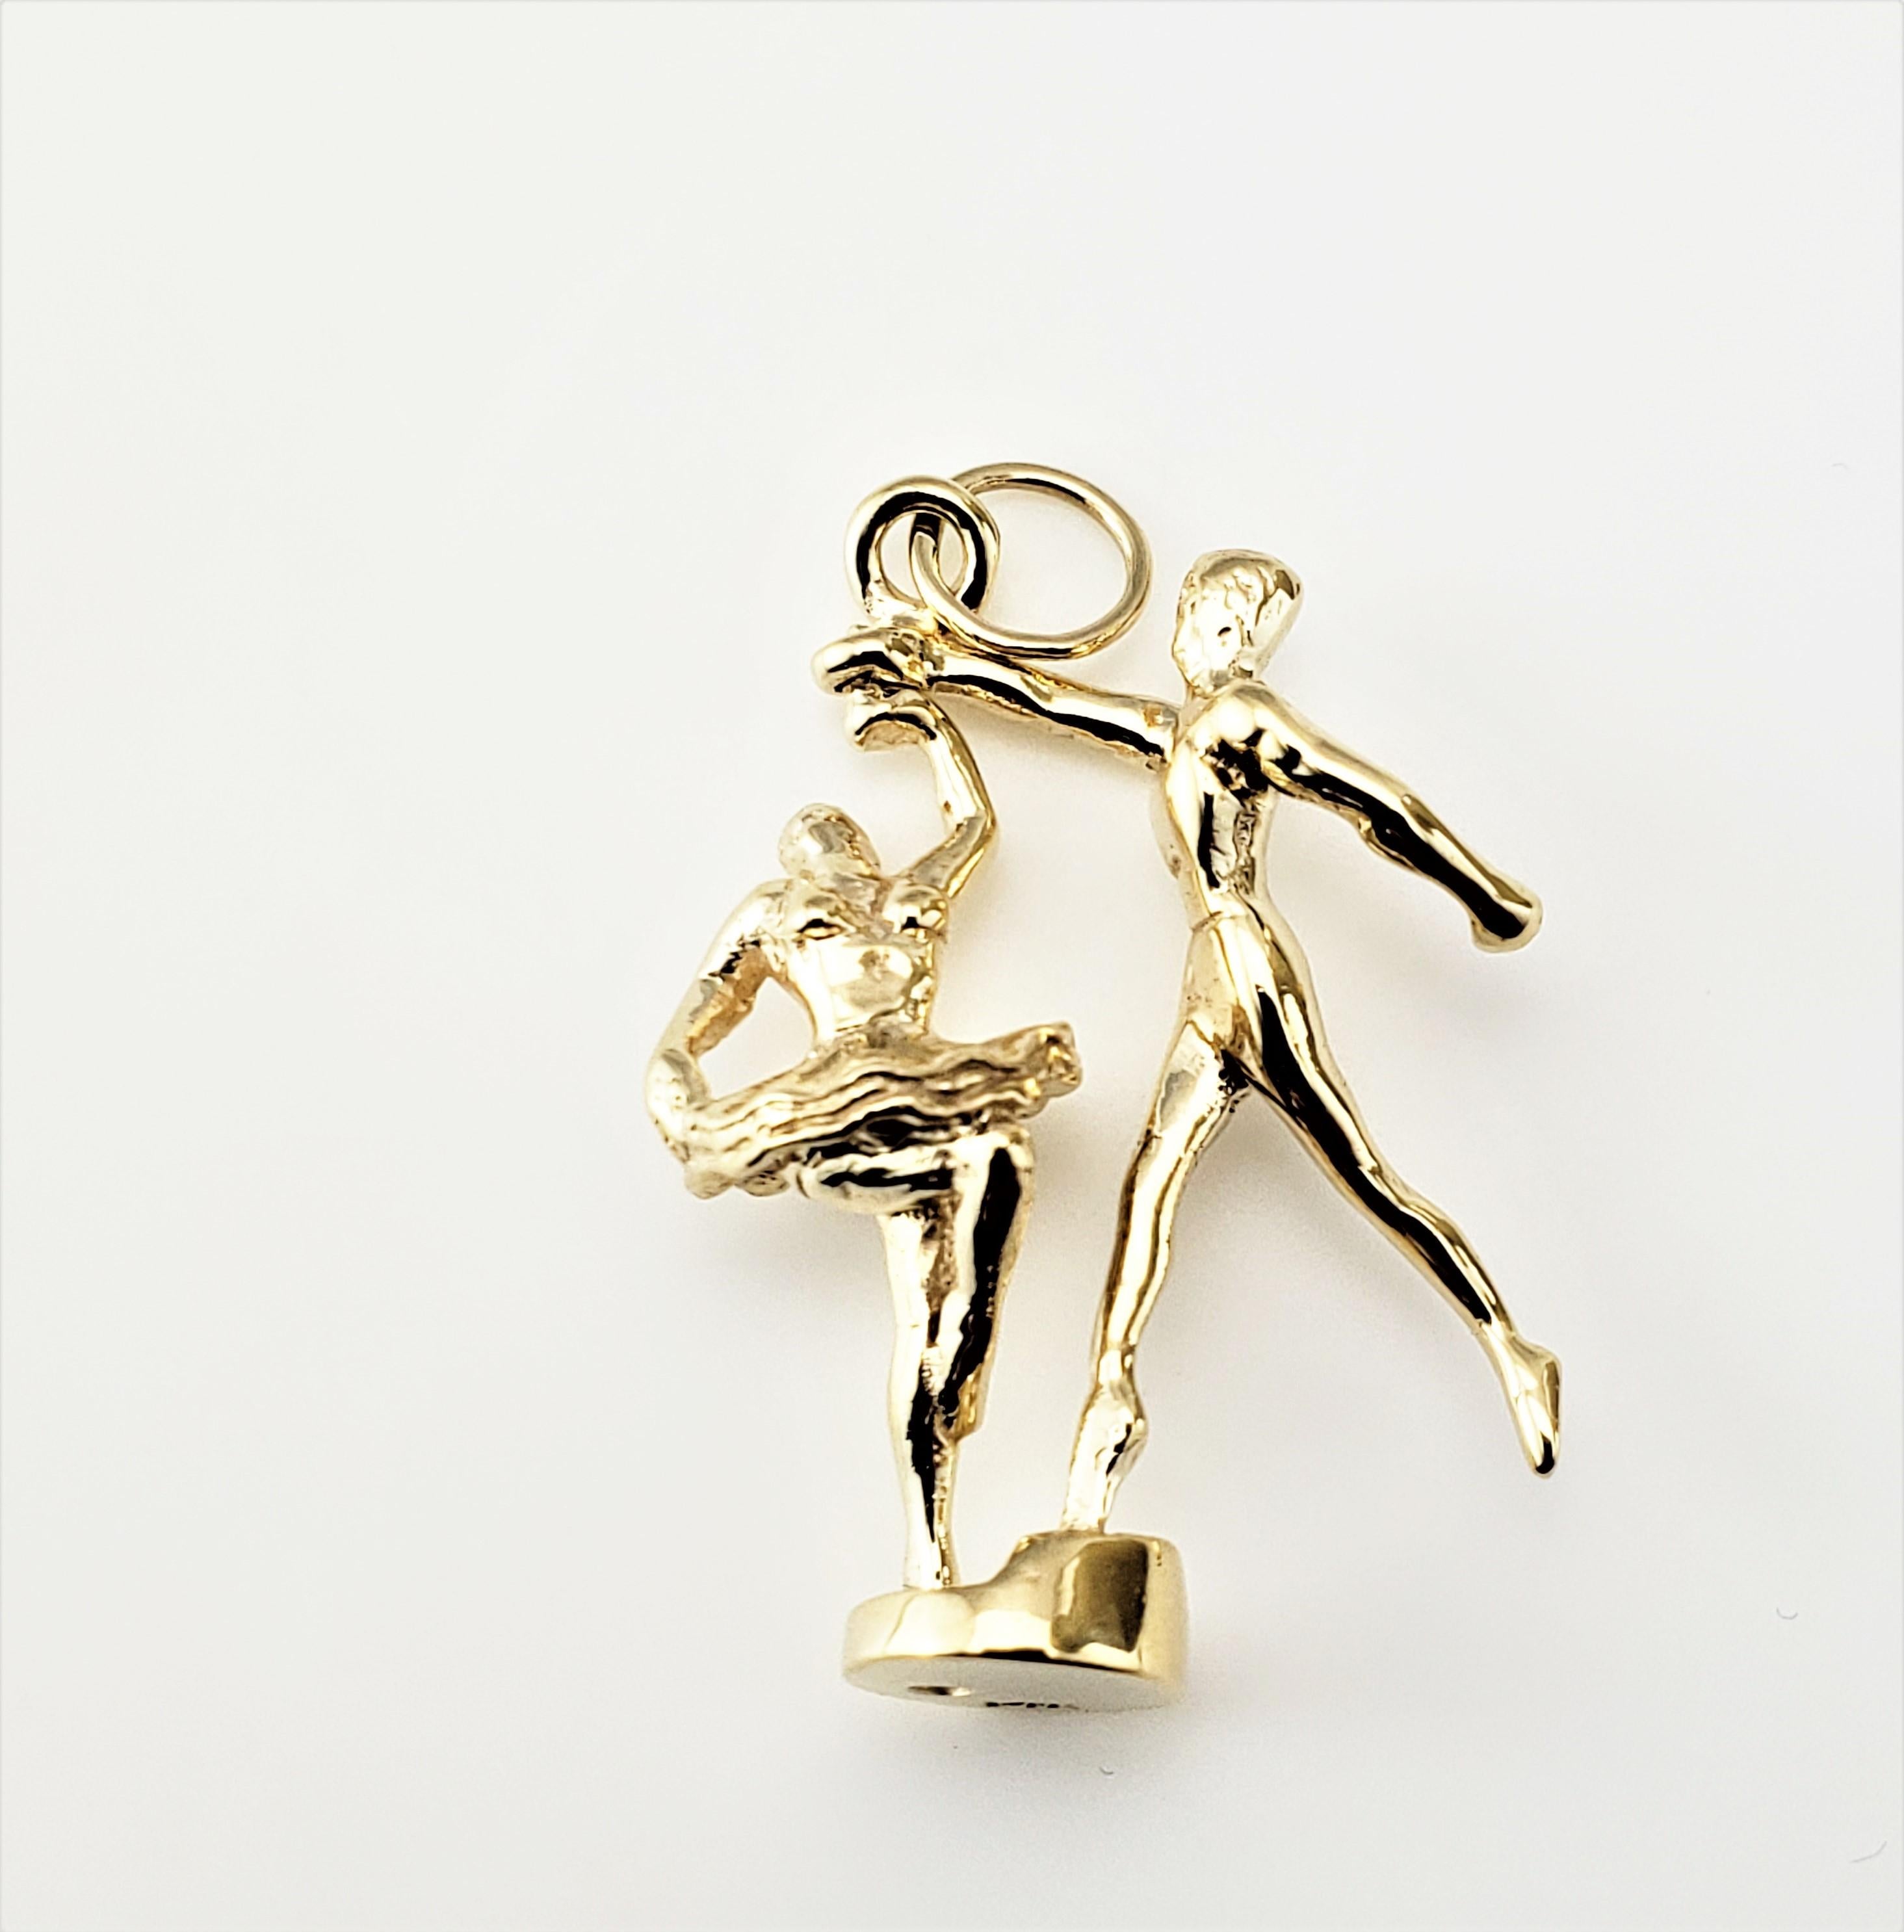 14 Karat Yellow Gold Mechanical Ballet Dancers Charm-

This lovely 3D charm features a lovely dancing couple with twirling ballerina!  Meticulously detailed in 14K yellow gold.

Size:  26 mm x 19 mm (actual charm)

Weight:  2.8 dwt. / 4.4